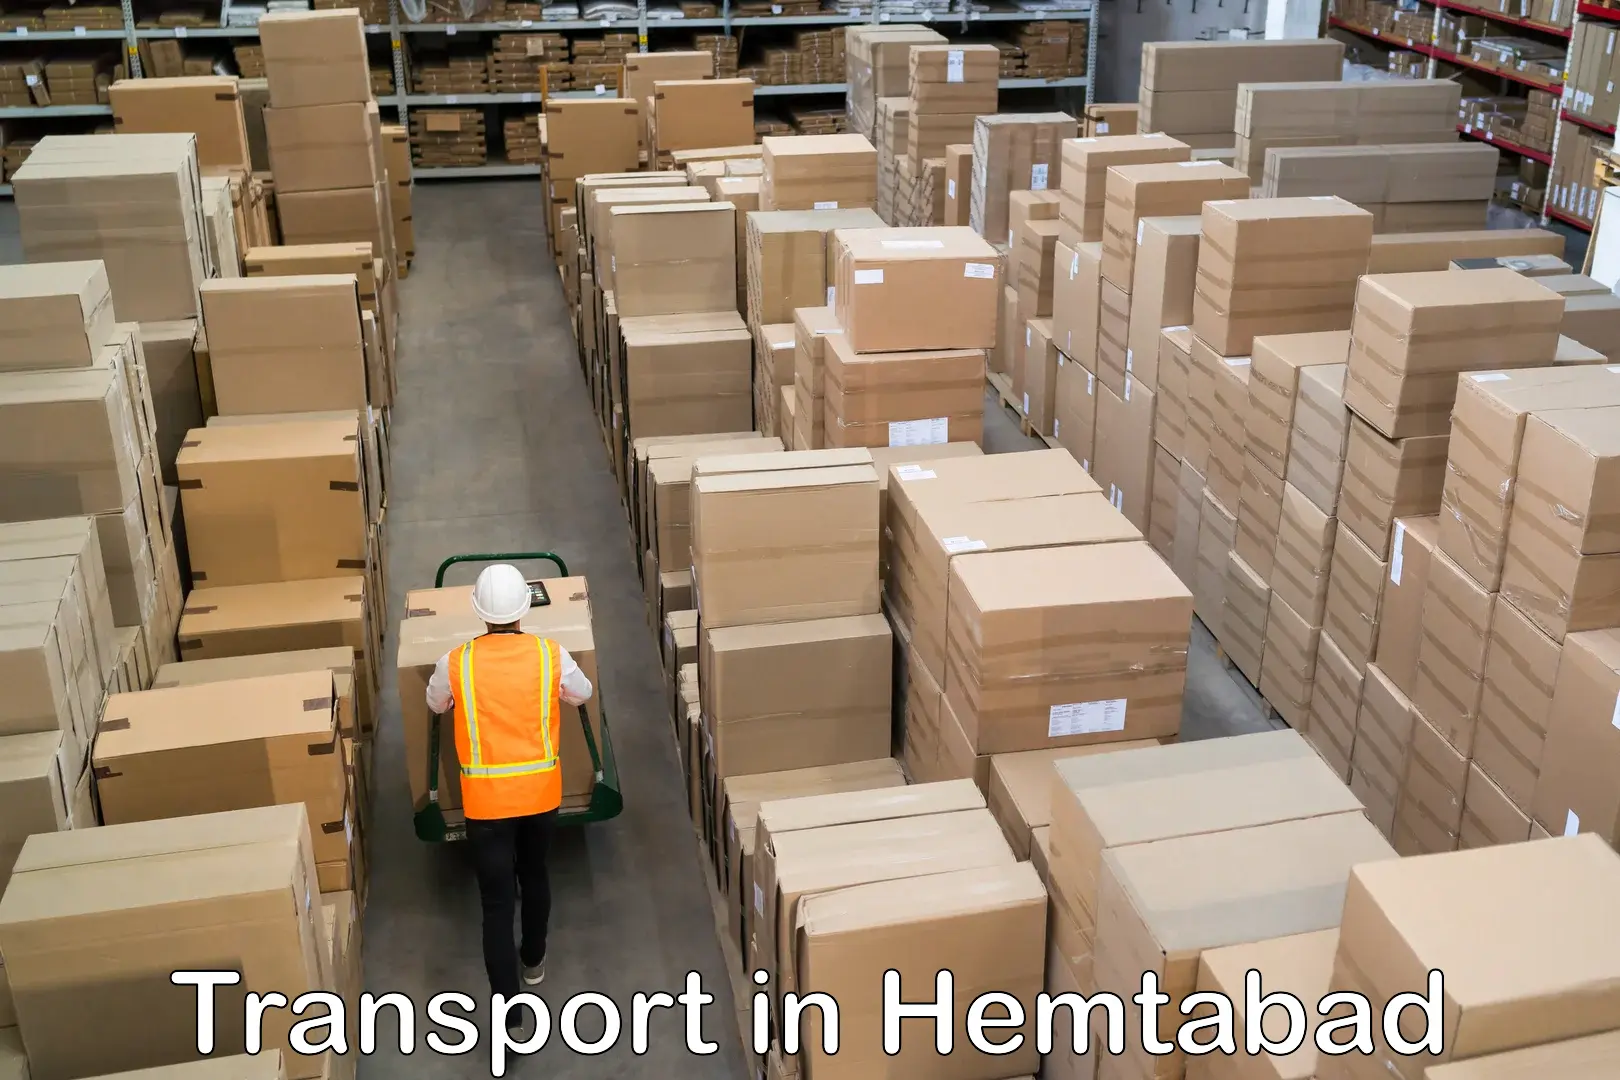 Air cargo transport services in Hemtabad